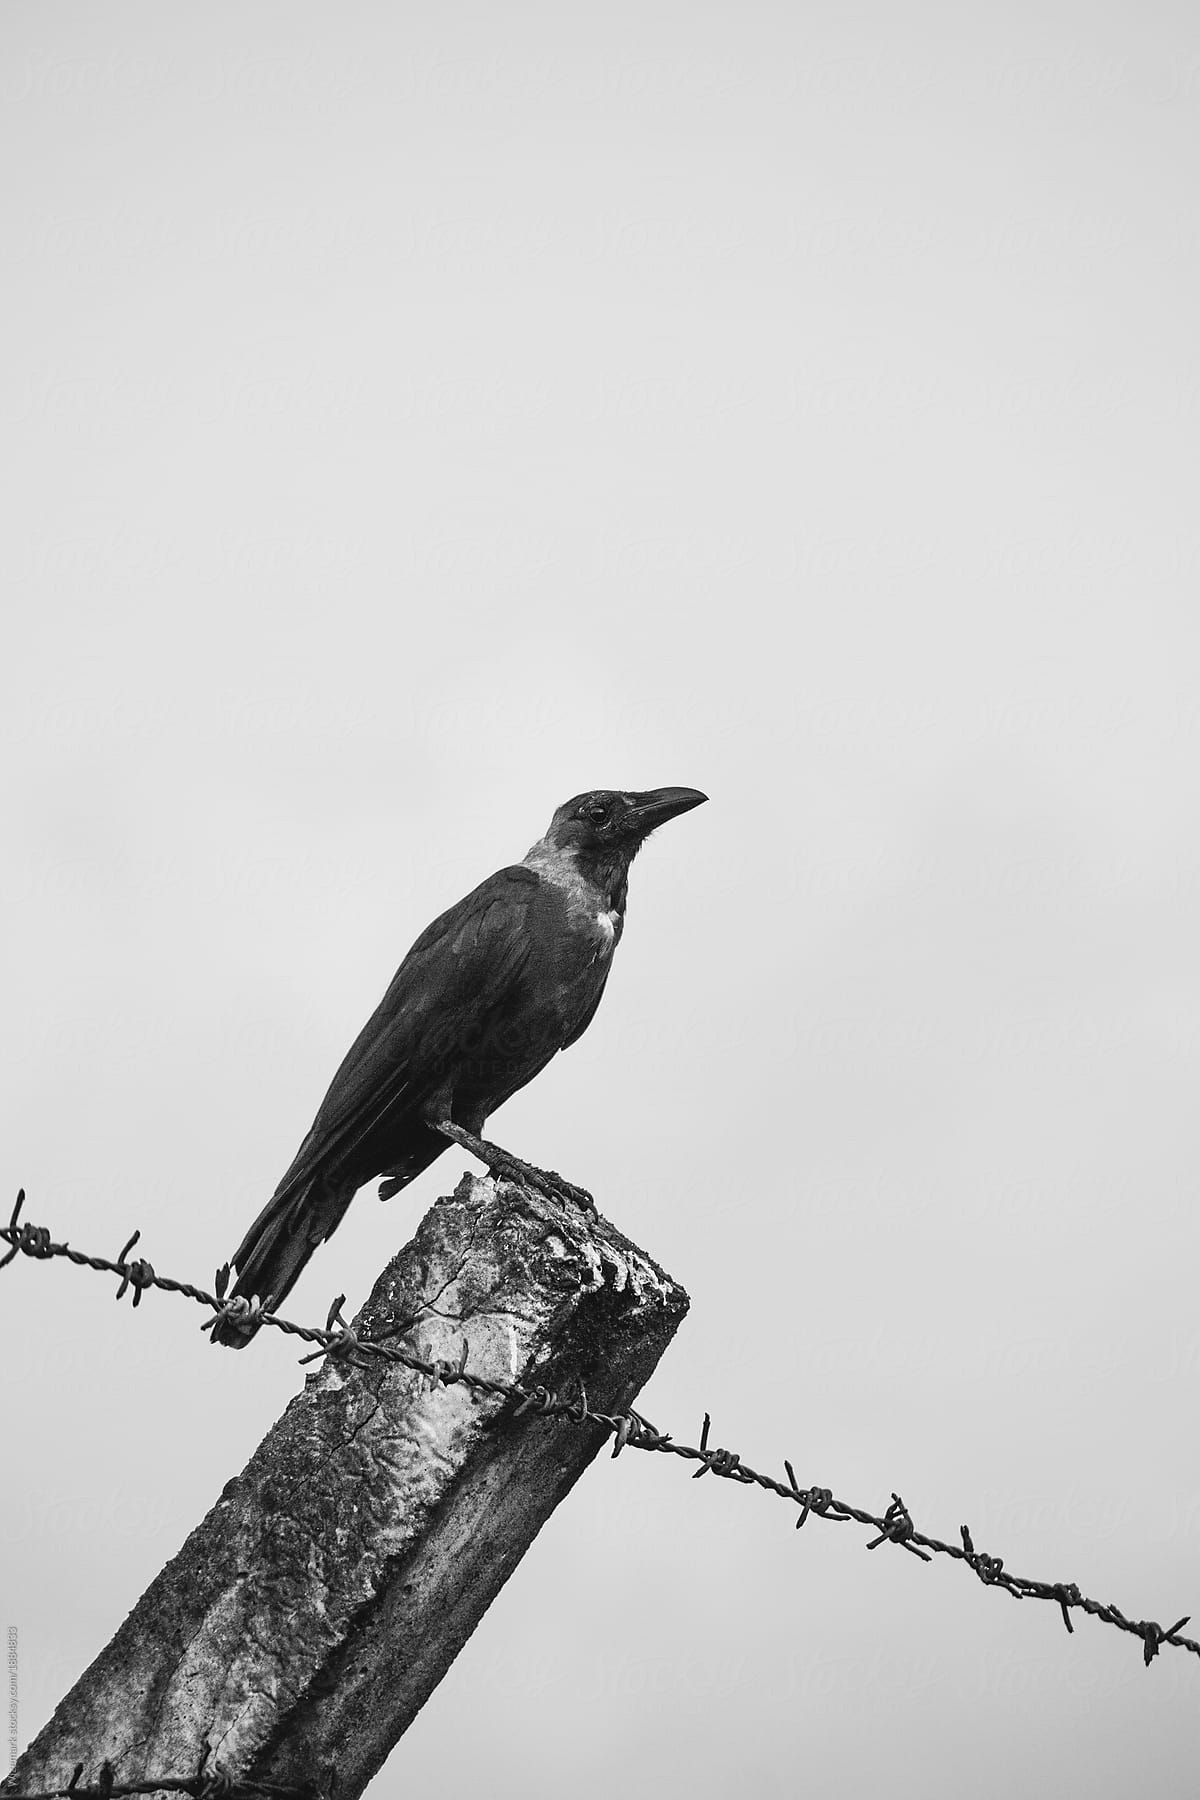 Perched crow on a barbwire